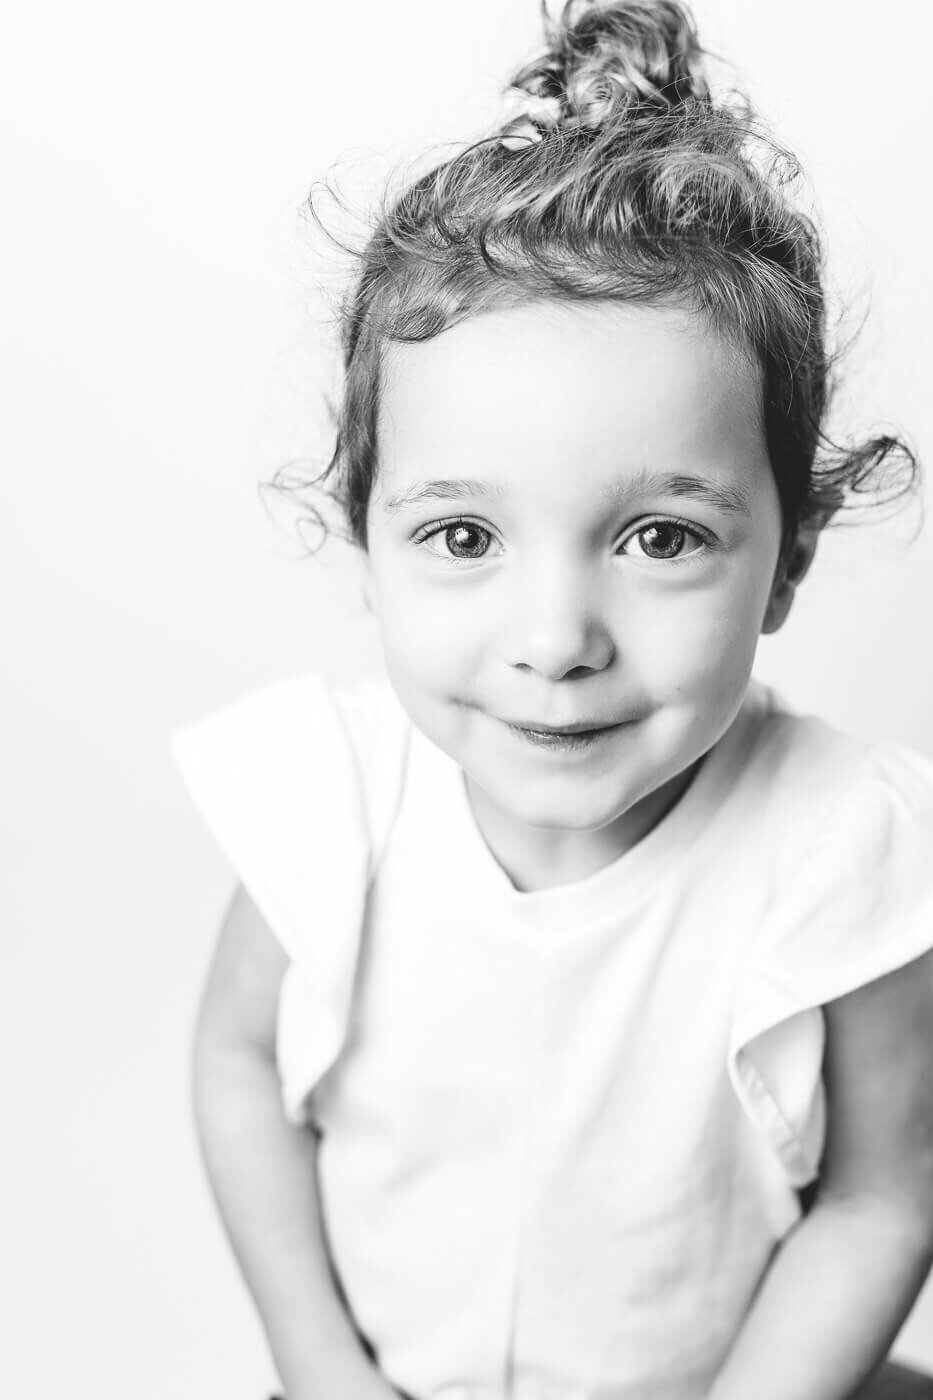 Upward angle on young girl with light and happy expression